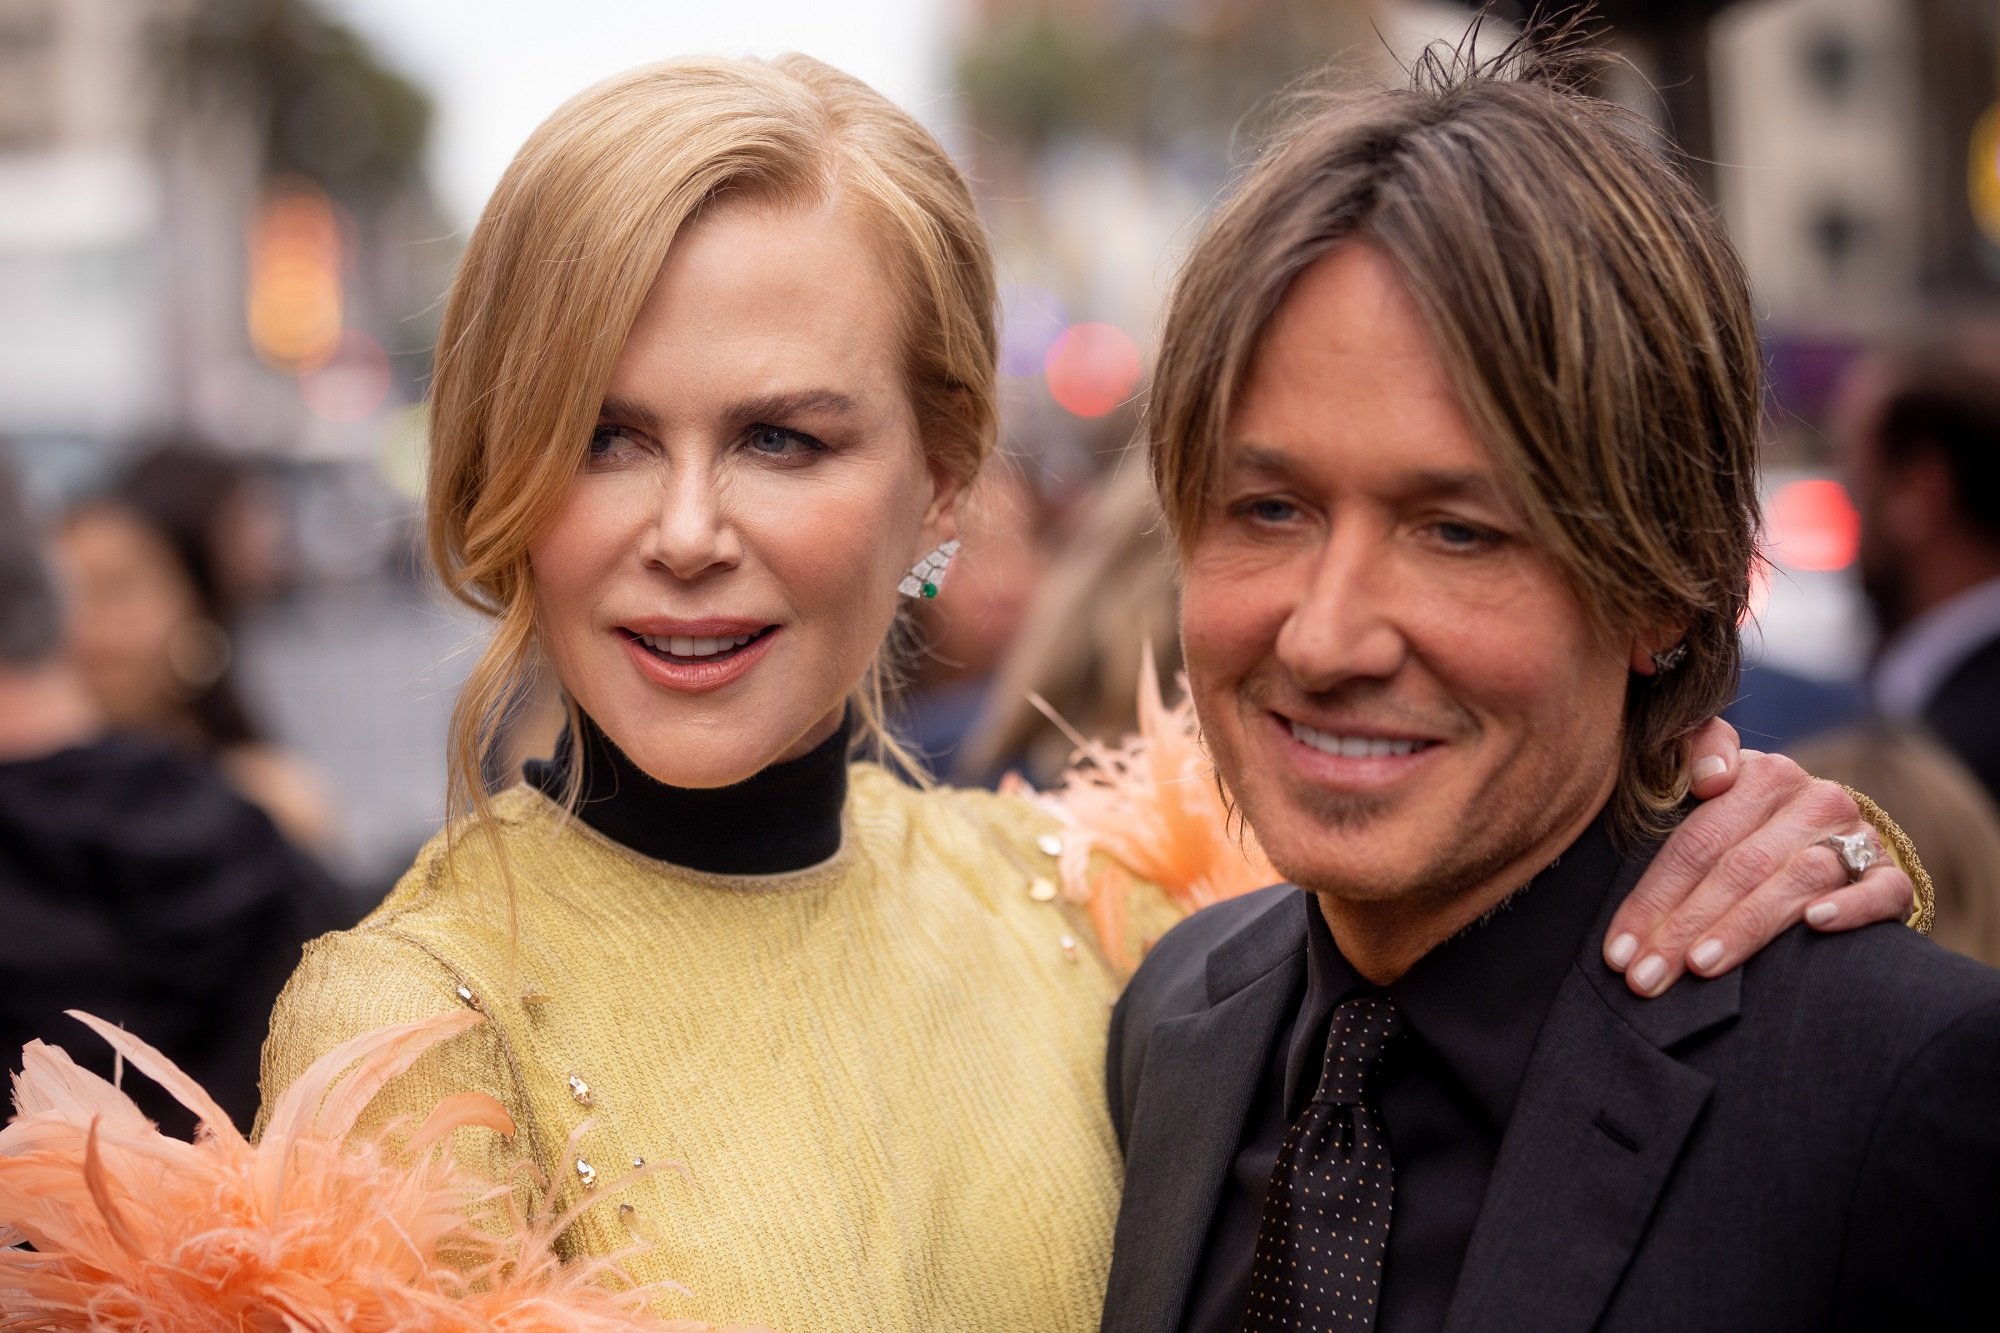 Nicole Kidman and Keith Urban at the Los Angeles premiere of 'The Northman'